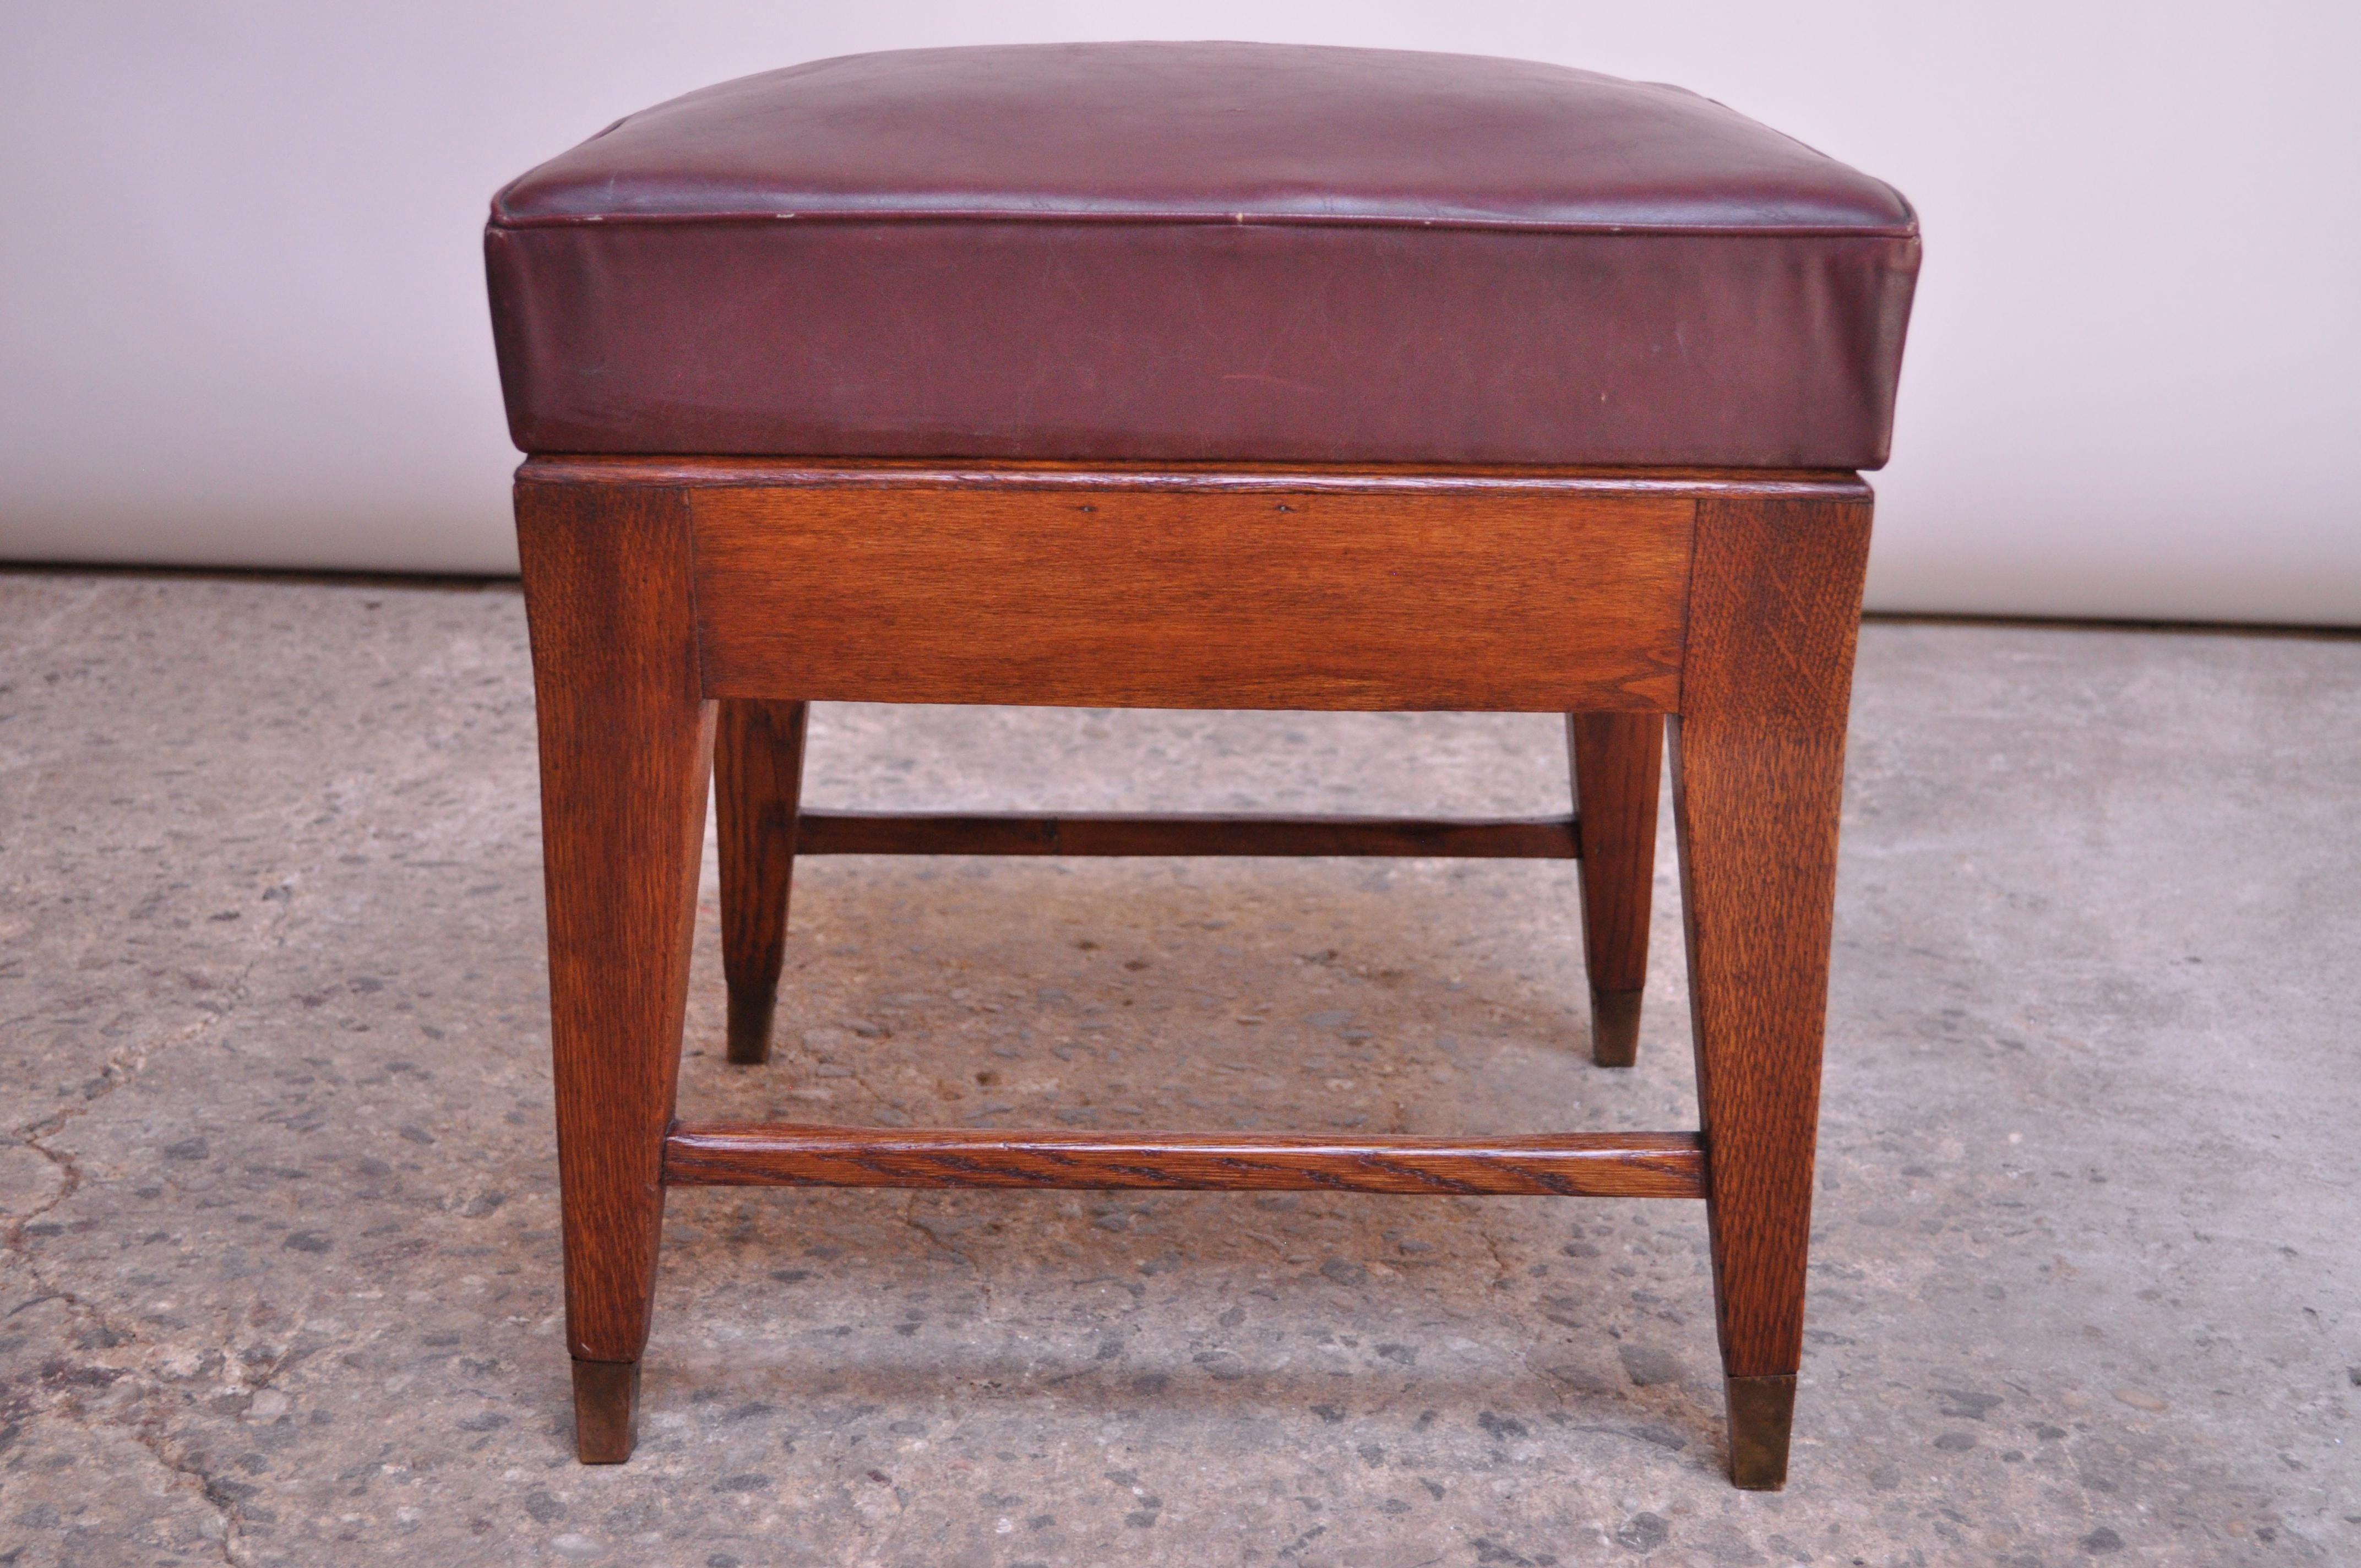 1950s Gio Ponti stool from the University of Brescia in oak with original brass sabots and plum leather seat. Wear consistent with age (spots / wear to the leather, tarnish to unpolished brass, and general wear to oak). Given the importance of the